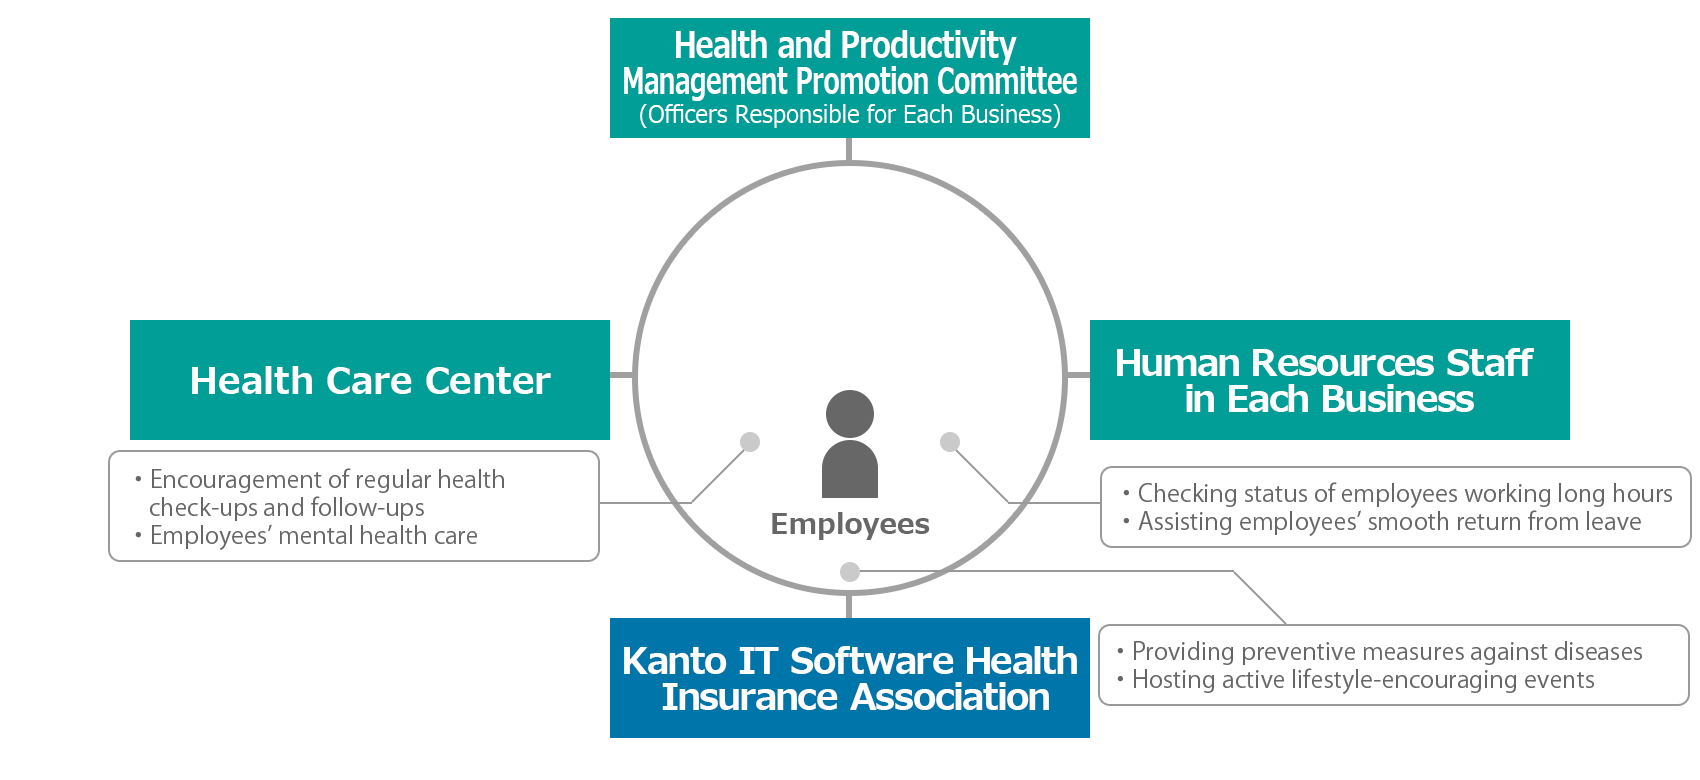 Our Approach to Health and Productivity Management KONAMI GROUP